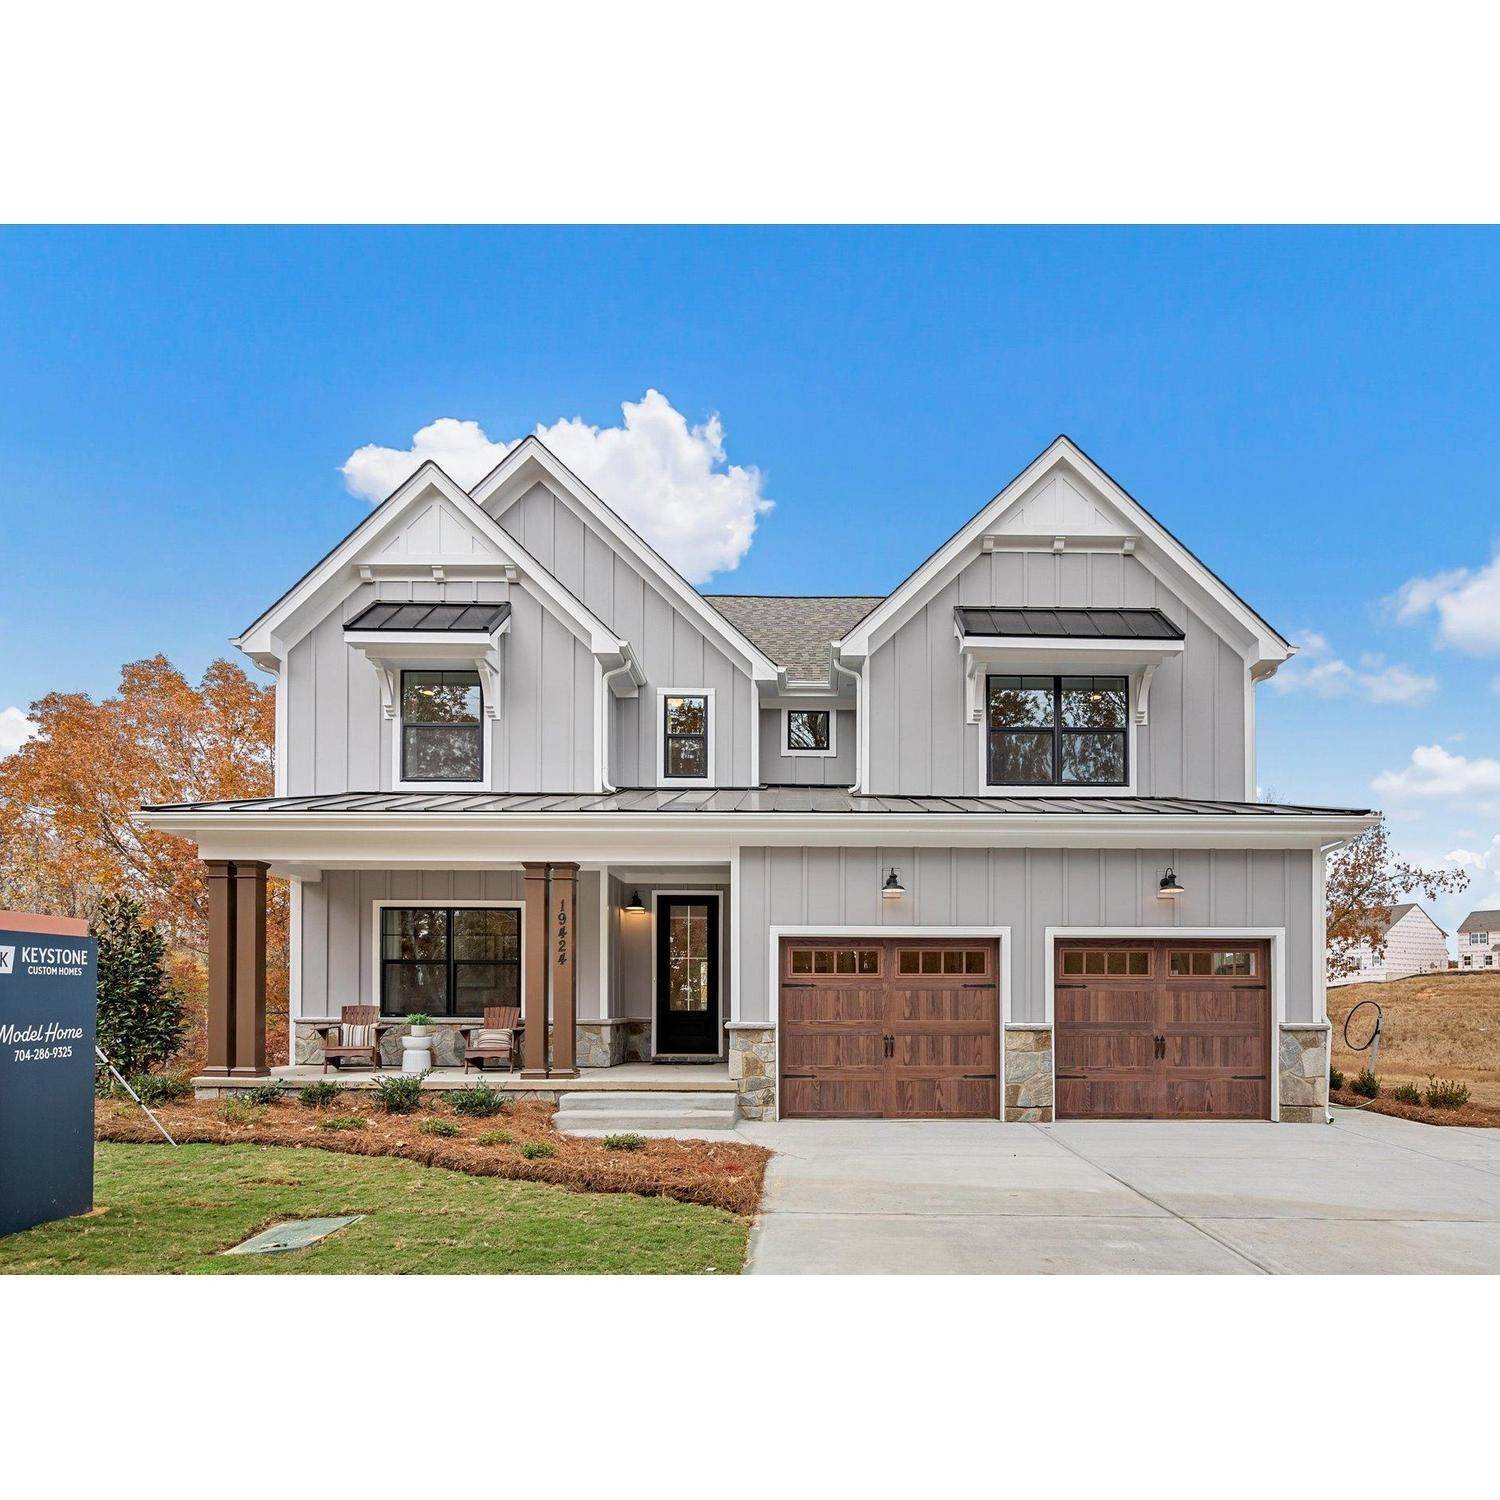 Cove at Trindle Spring xây dựng tại 38 Woods Dr, Mechanicsburg, PA 17050